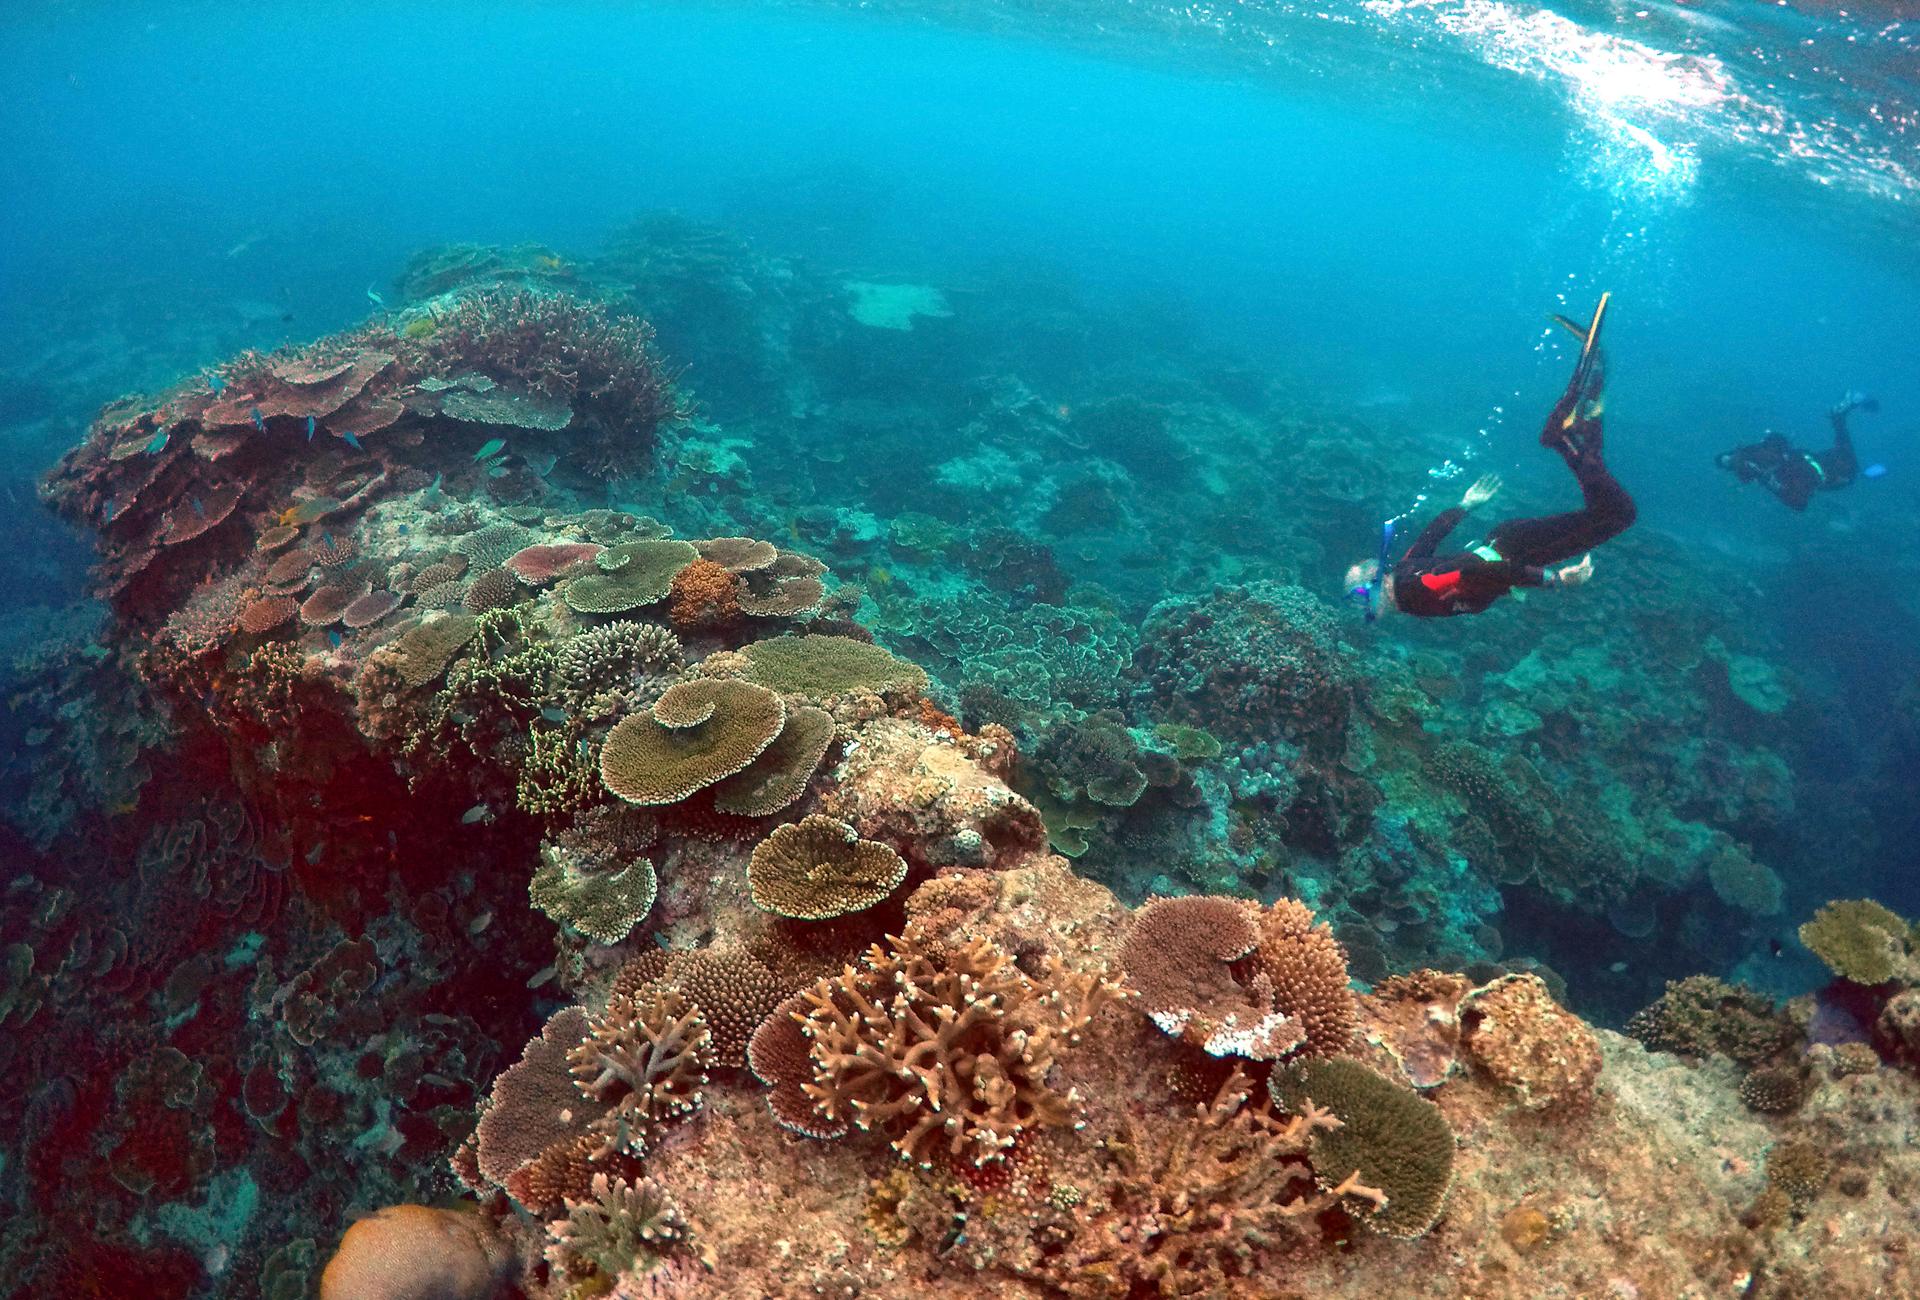 Queensland Parks and Wildlife Service rangers inspect the Great Barrier Reef's condition in an area called the "Coral Gardens," located at Lady Elliot Island in Queensland, Australia, on June 10, 2015. 